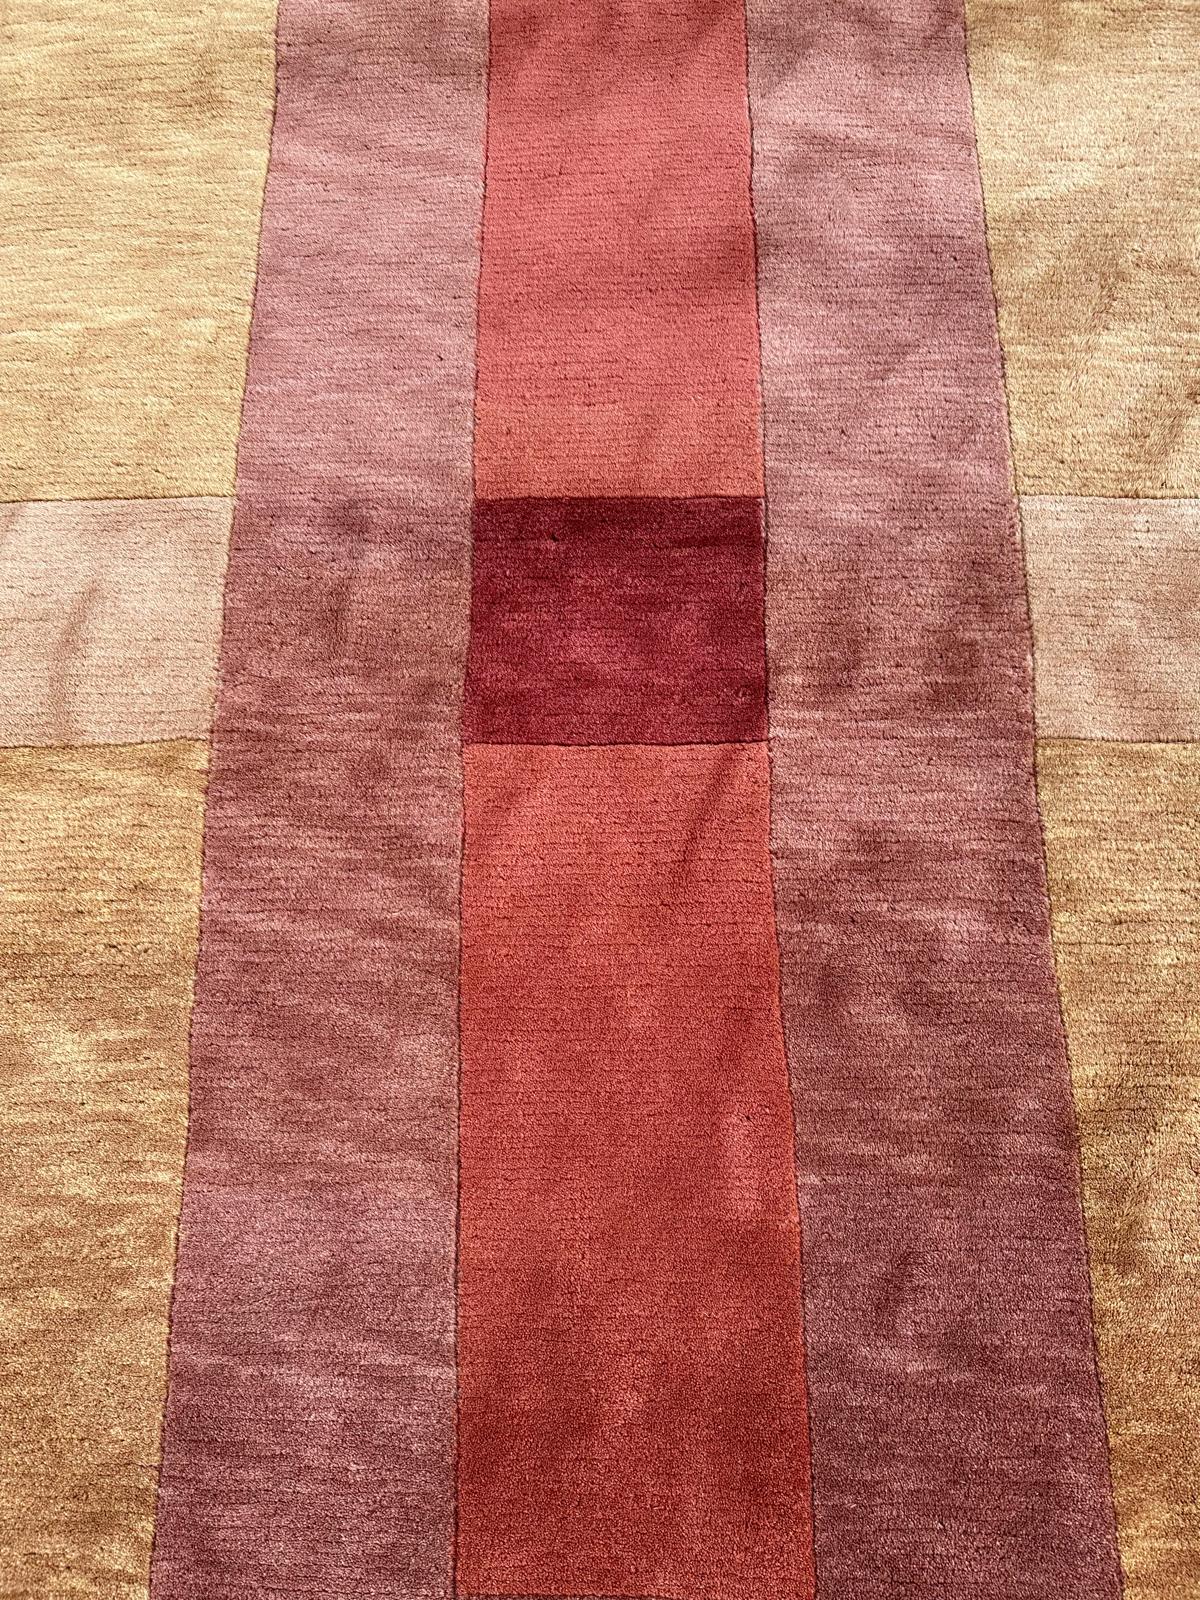 A beige ground wool rug in red, brown and orange 300cm x 210cm - Image 3 of 5